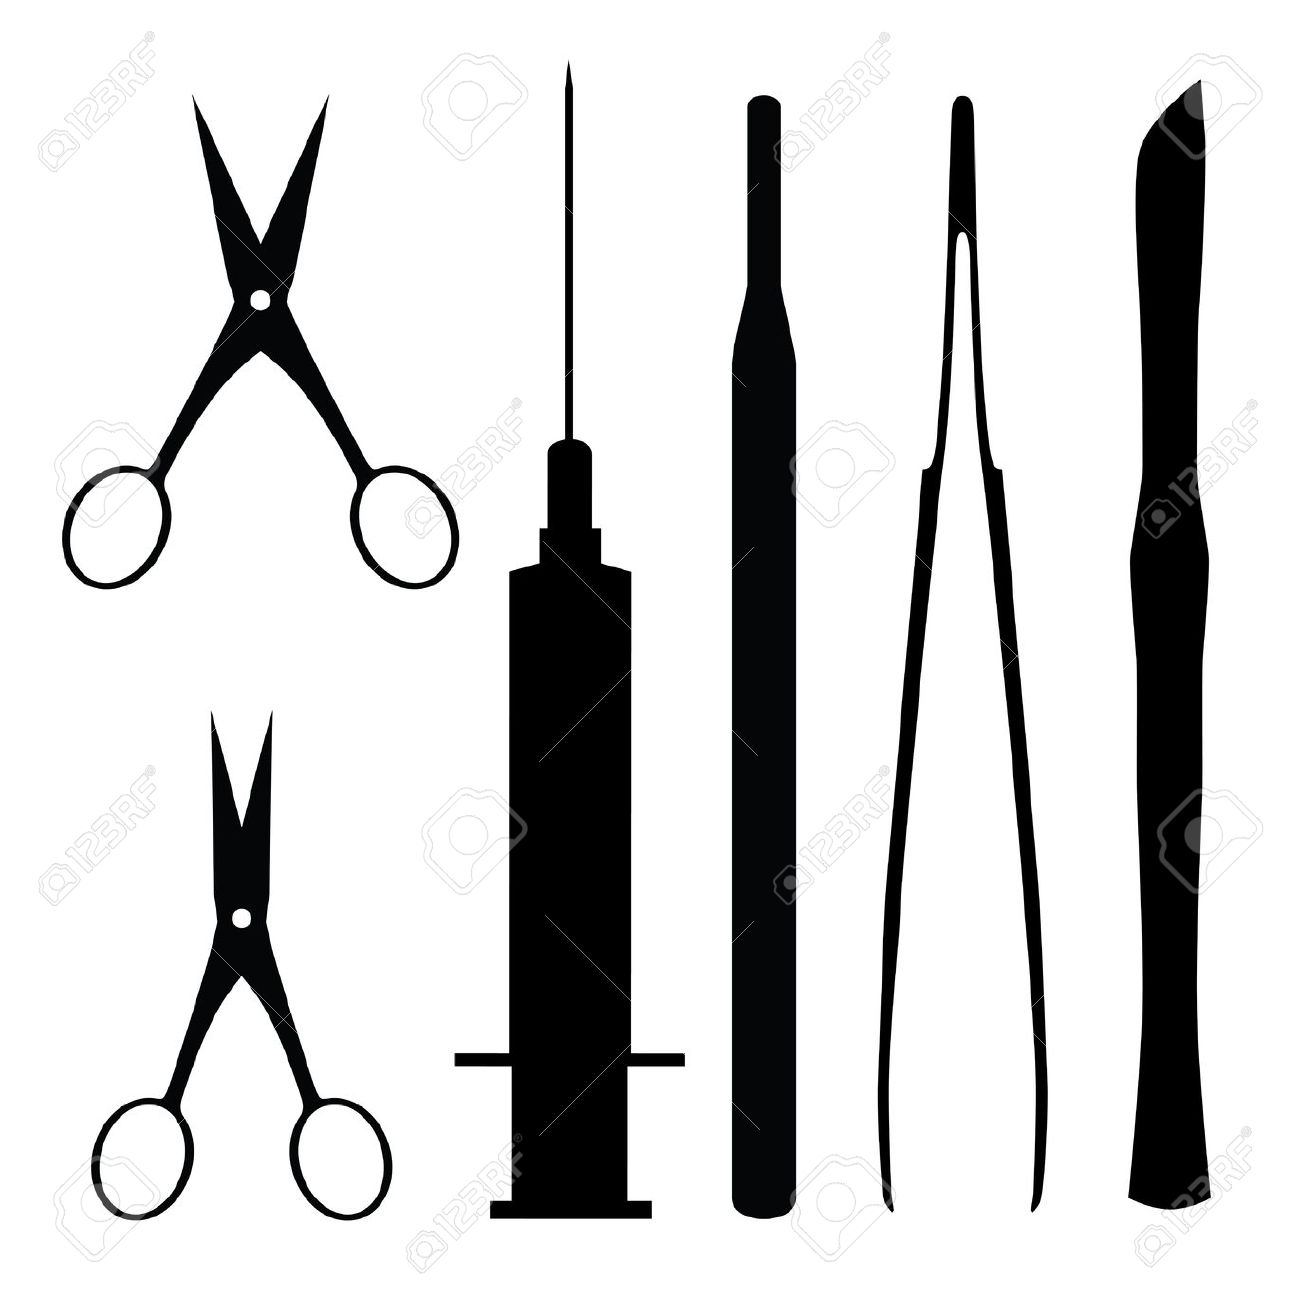 medicine clipart surgical tool